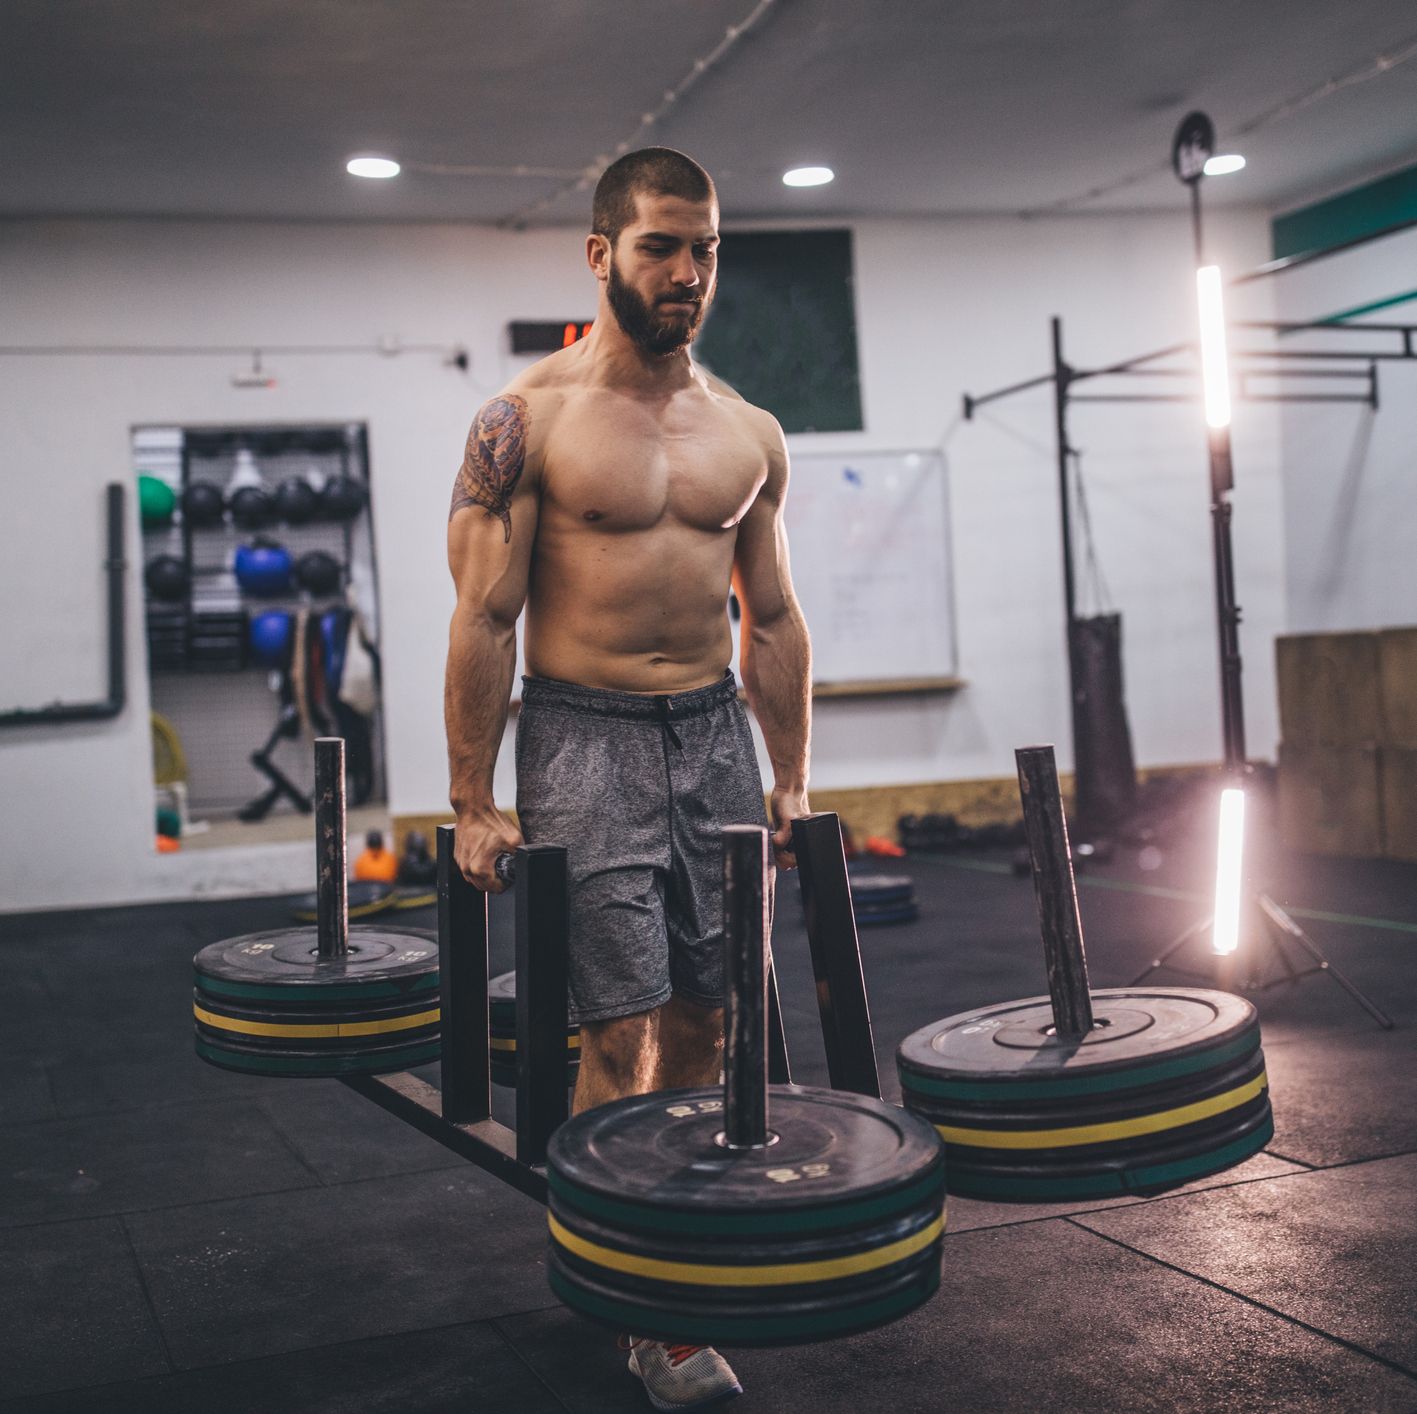 Try These Alternative Exercises If You Have Trouble With Deadlifts